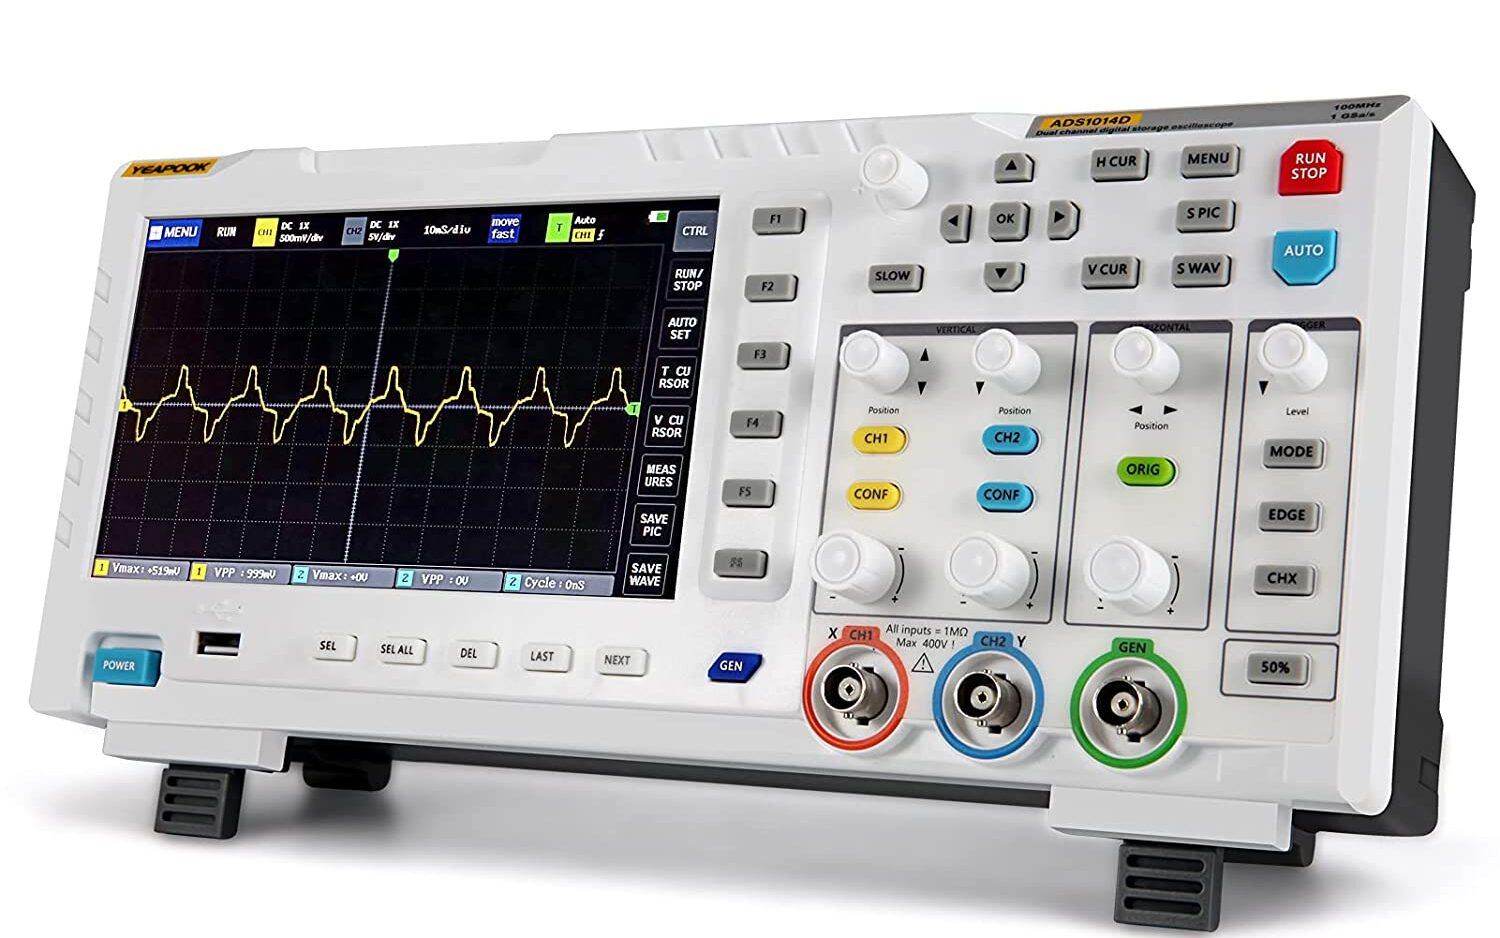 Yeapook oscilloscope review